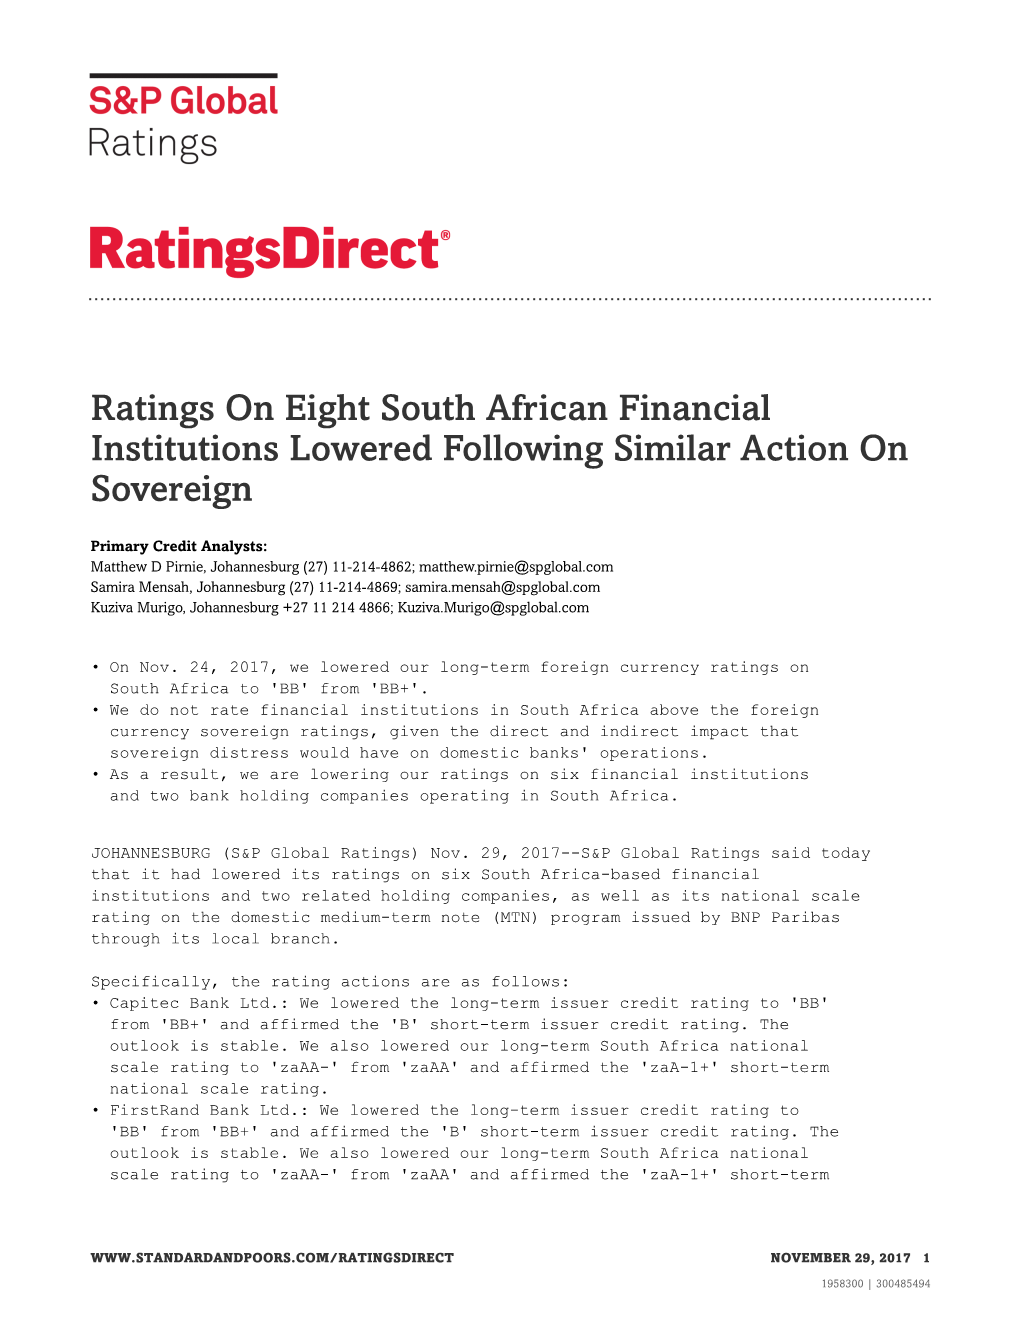 Ratings on Eight South African Financial Institutions Lowered Following Similar Action on Sovereign